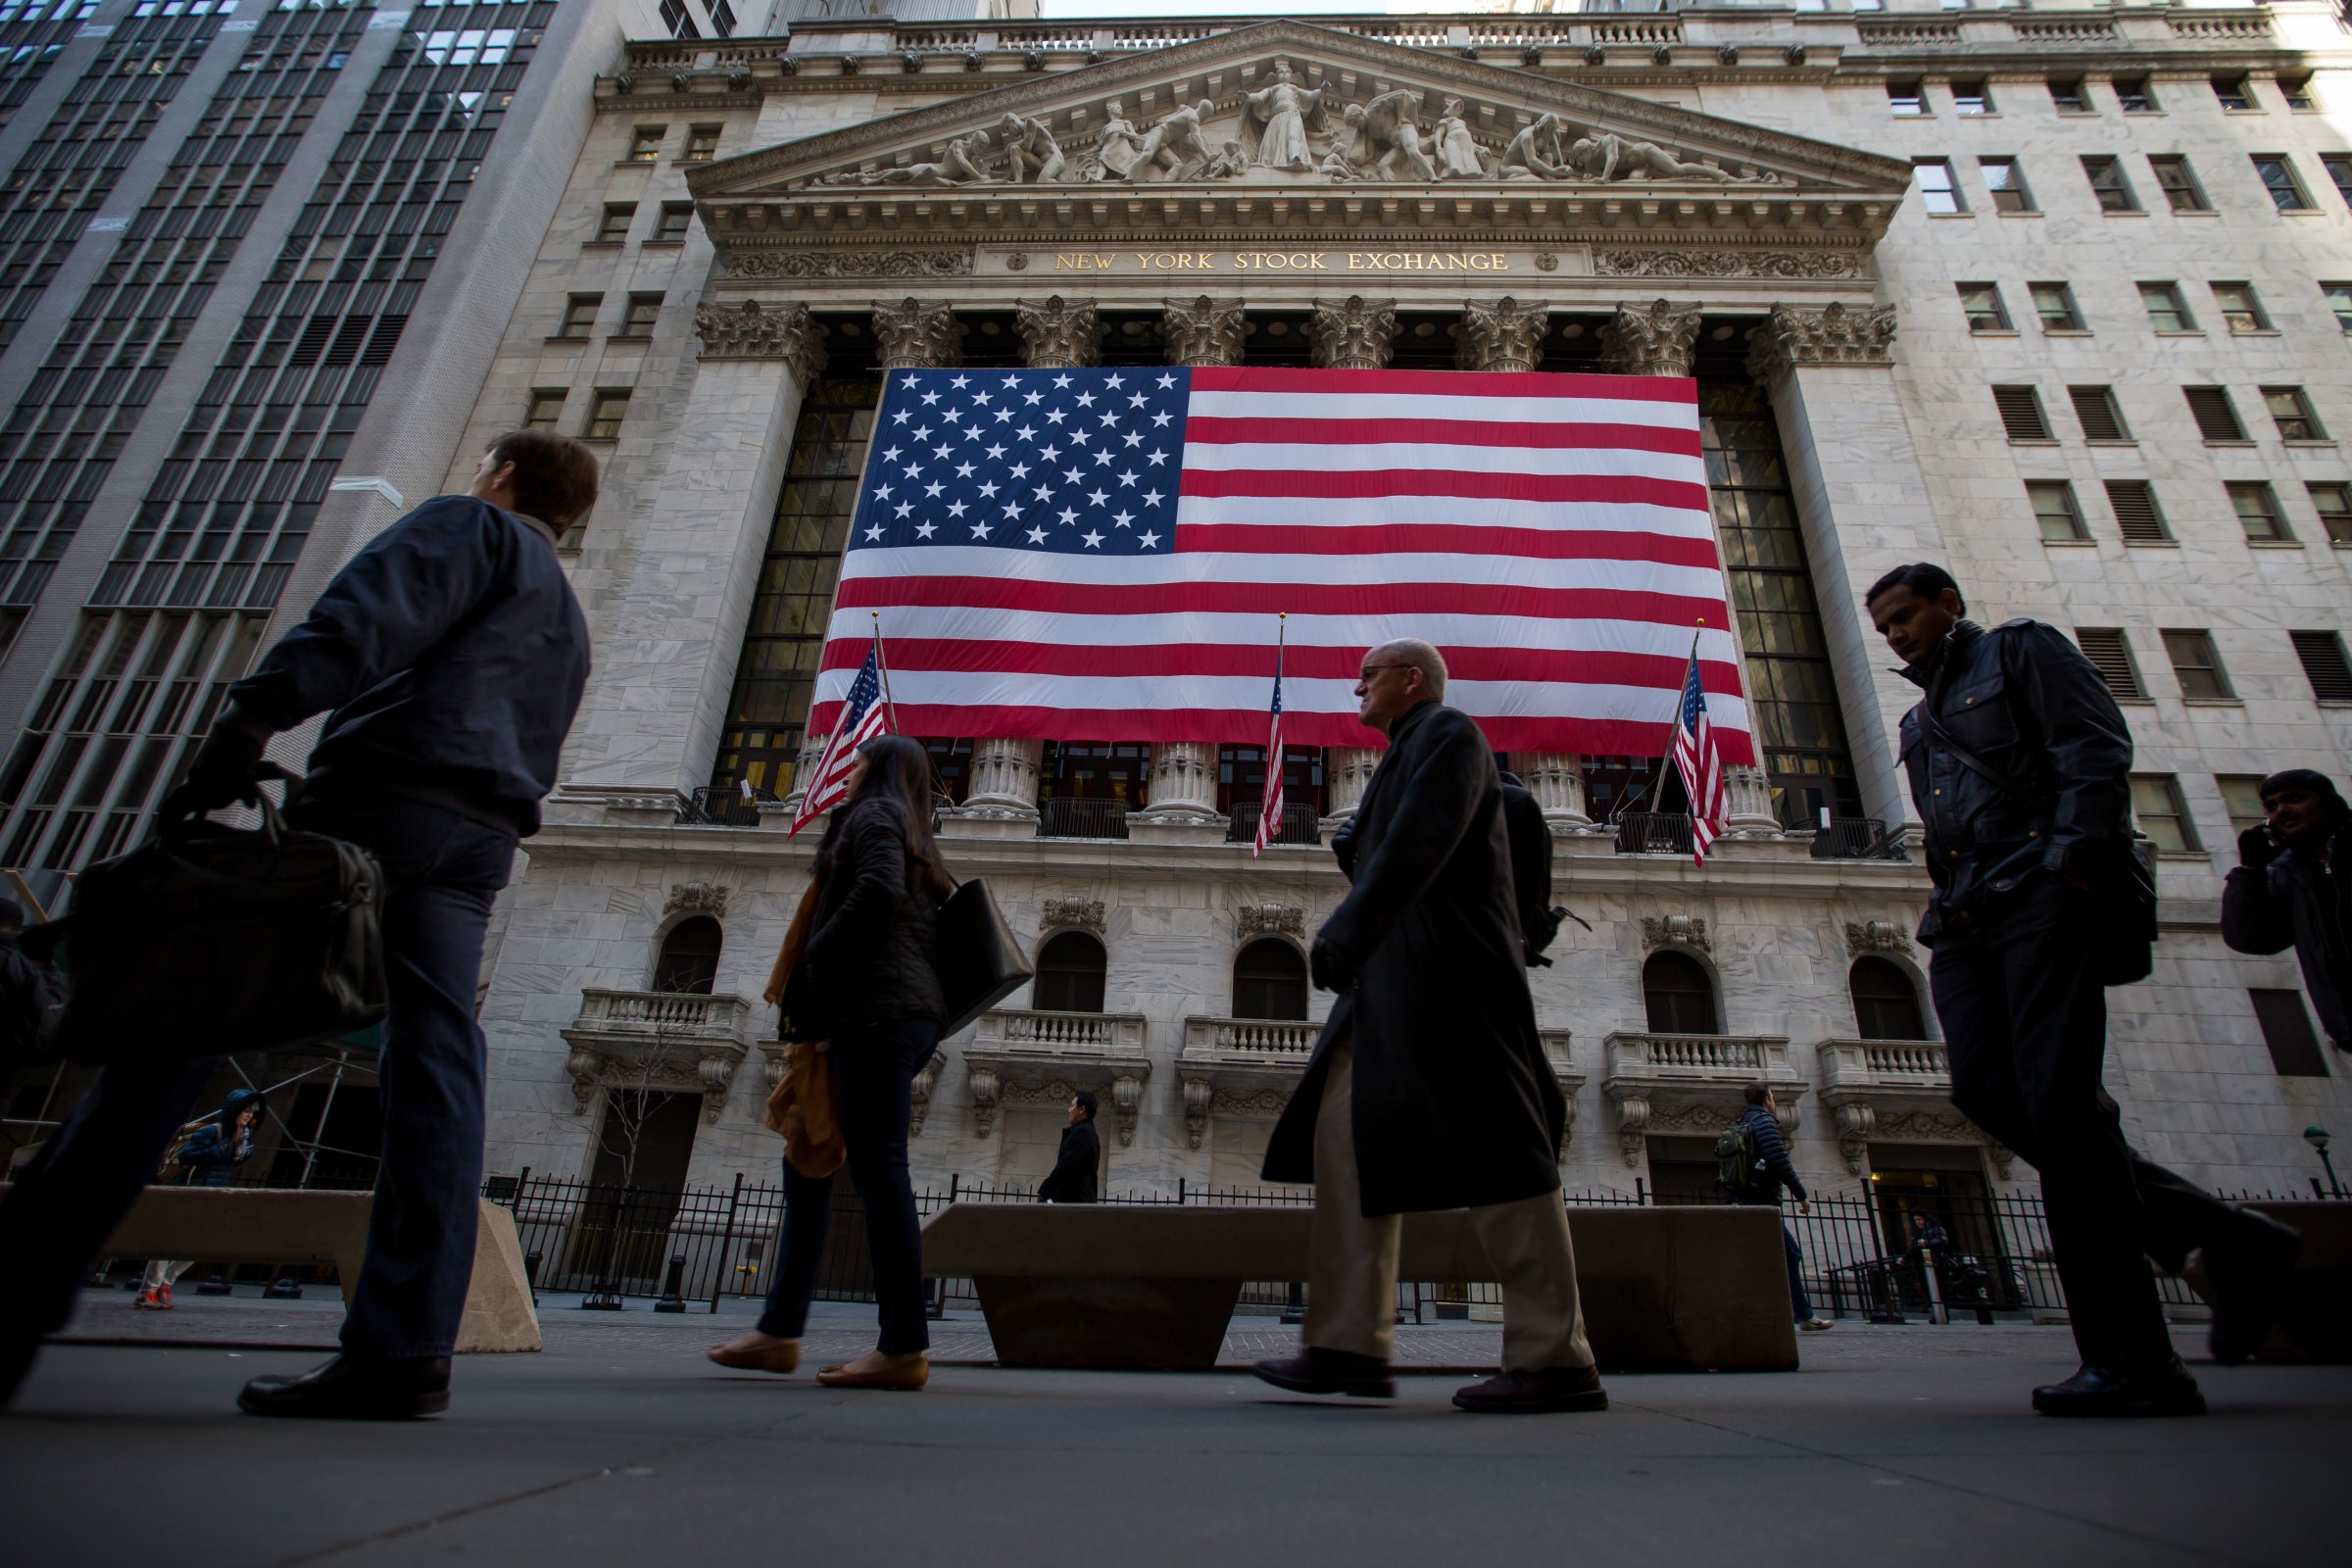 Trading On The Floor Of The NYSE As U.S. Stocks Rise With Dollar Amid Commodities Climb